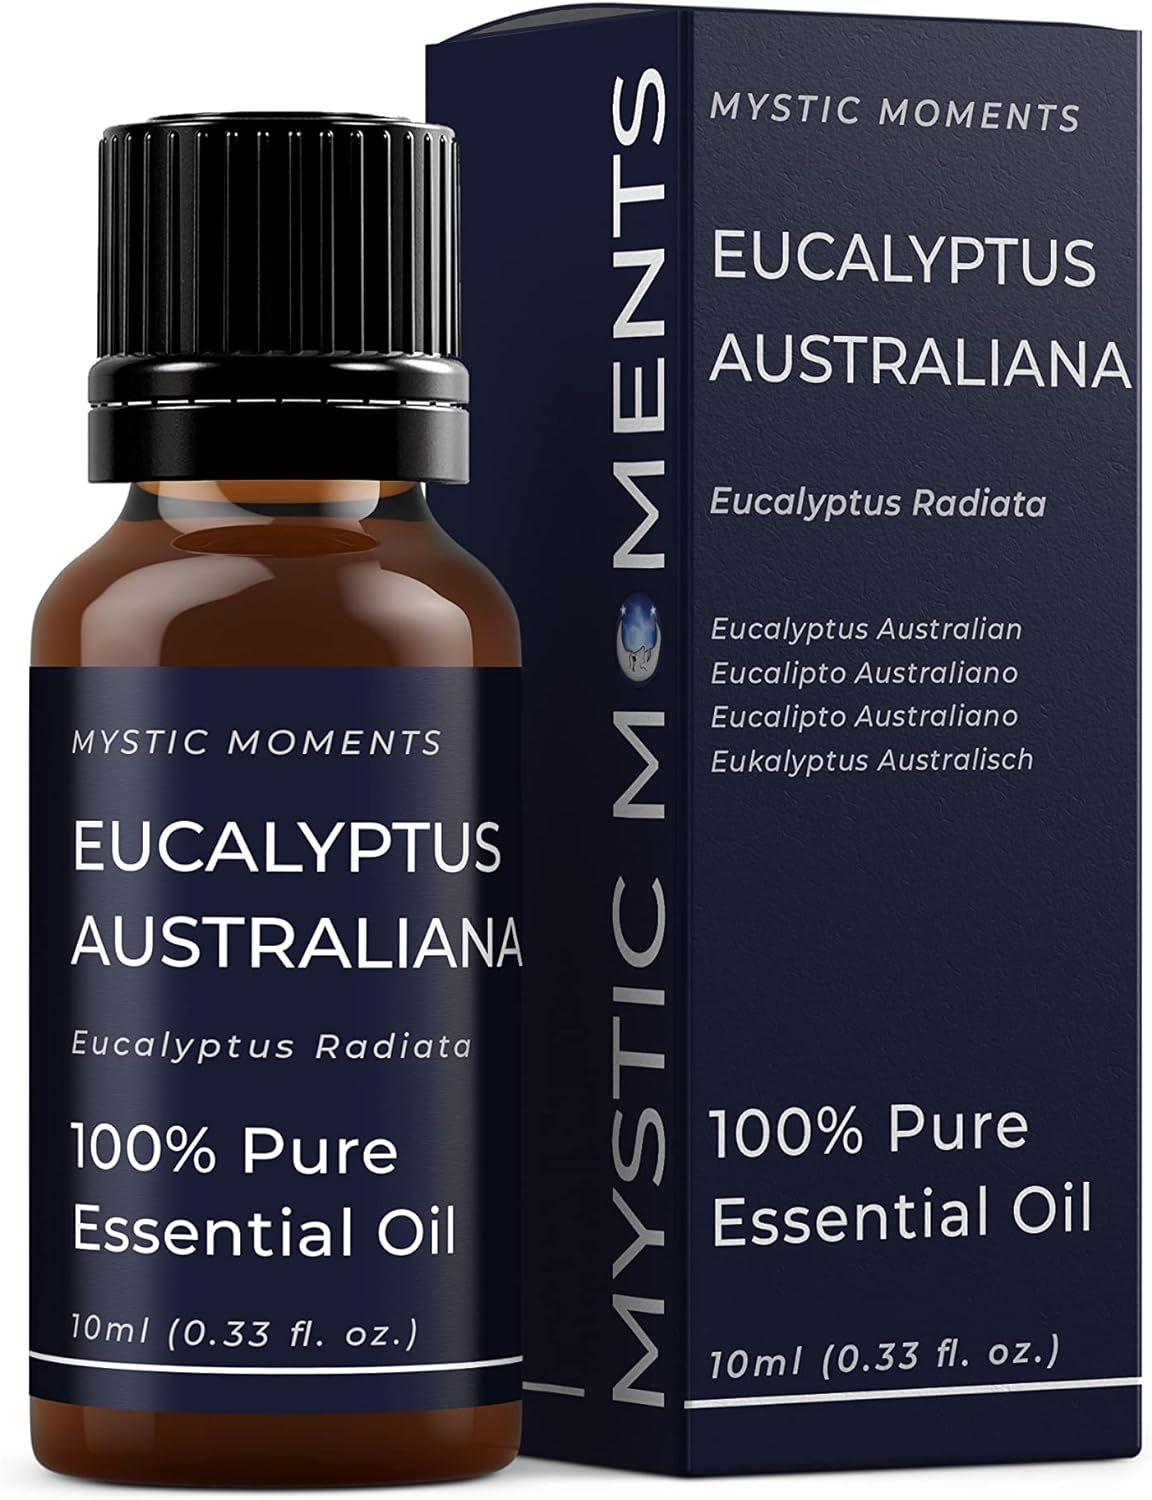 Mystic Moments | Eucalyptus Australiana Essential Oil 10ml - Pure & Natural oil for Diffusers, Aromatherapy & Massage Blends Vegan GMO Free